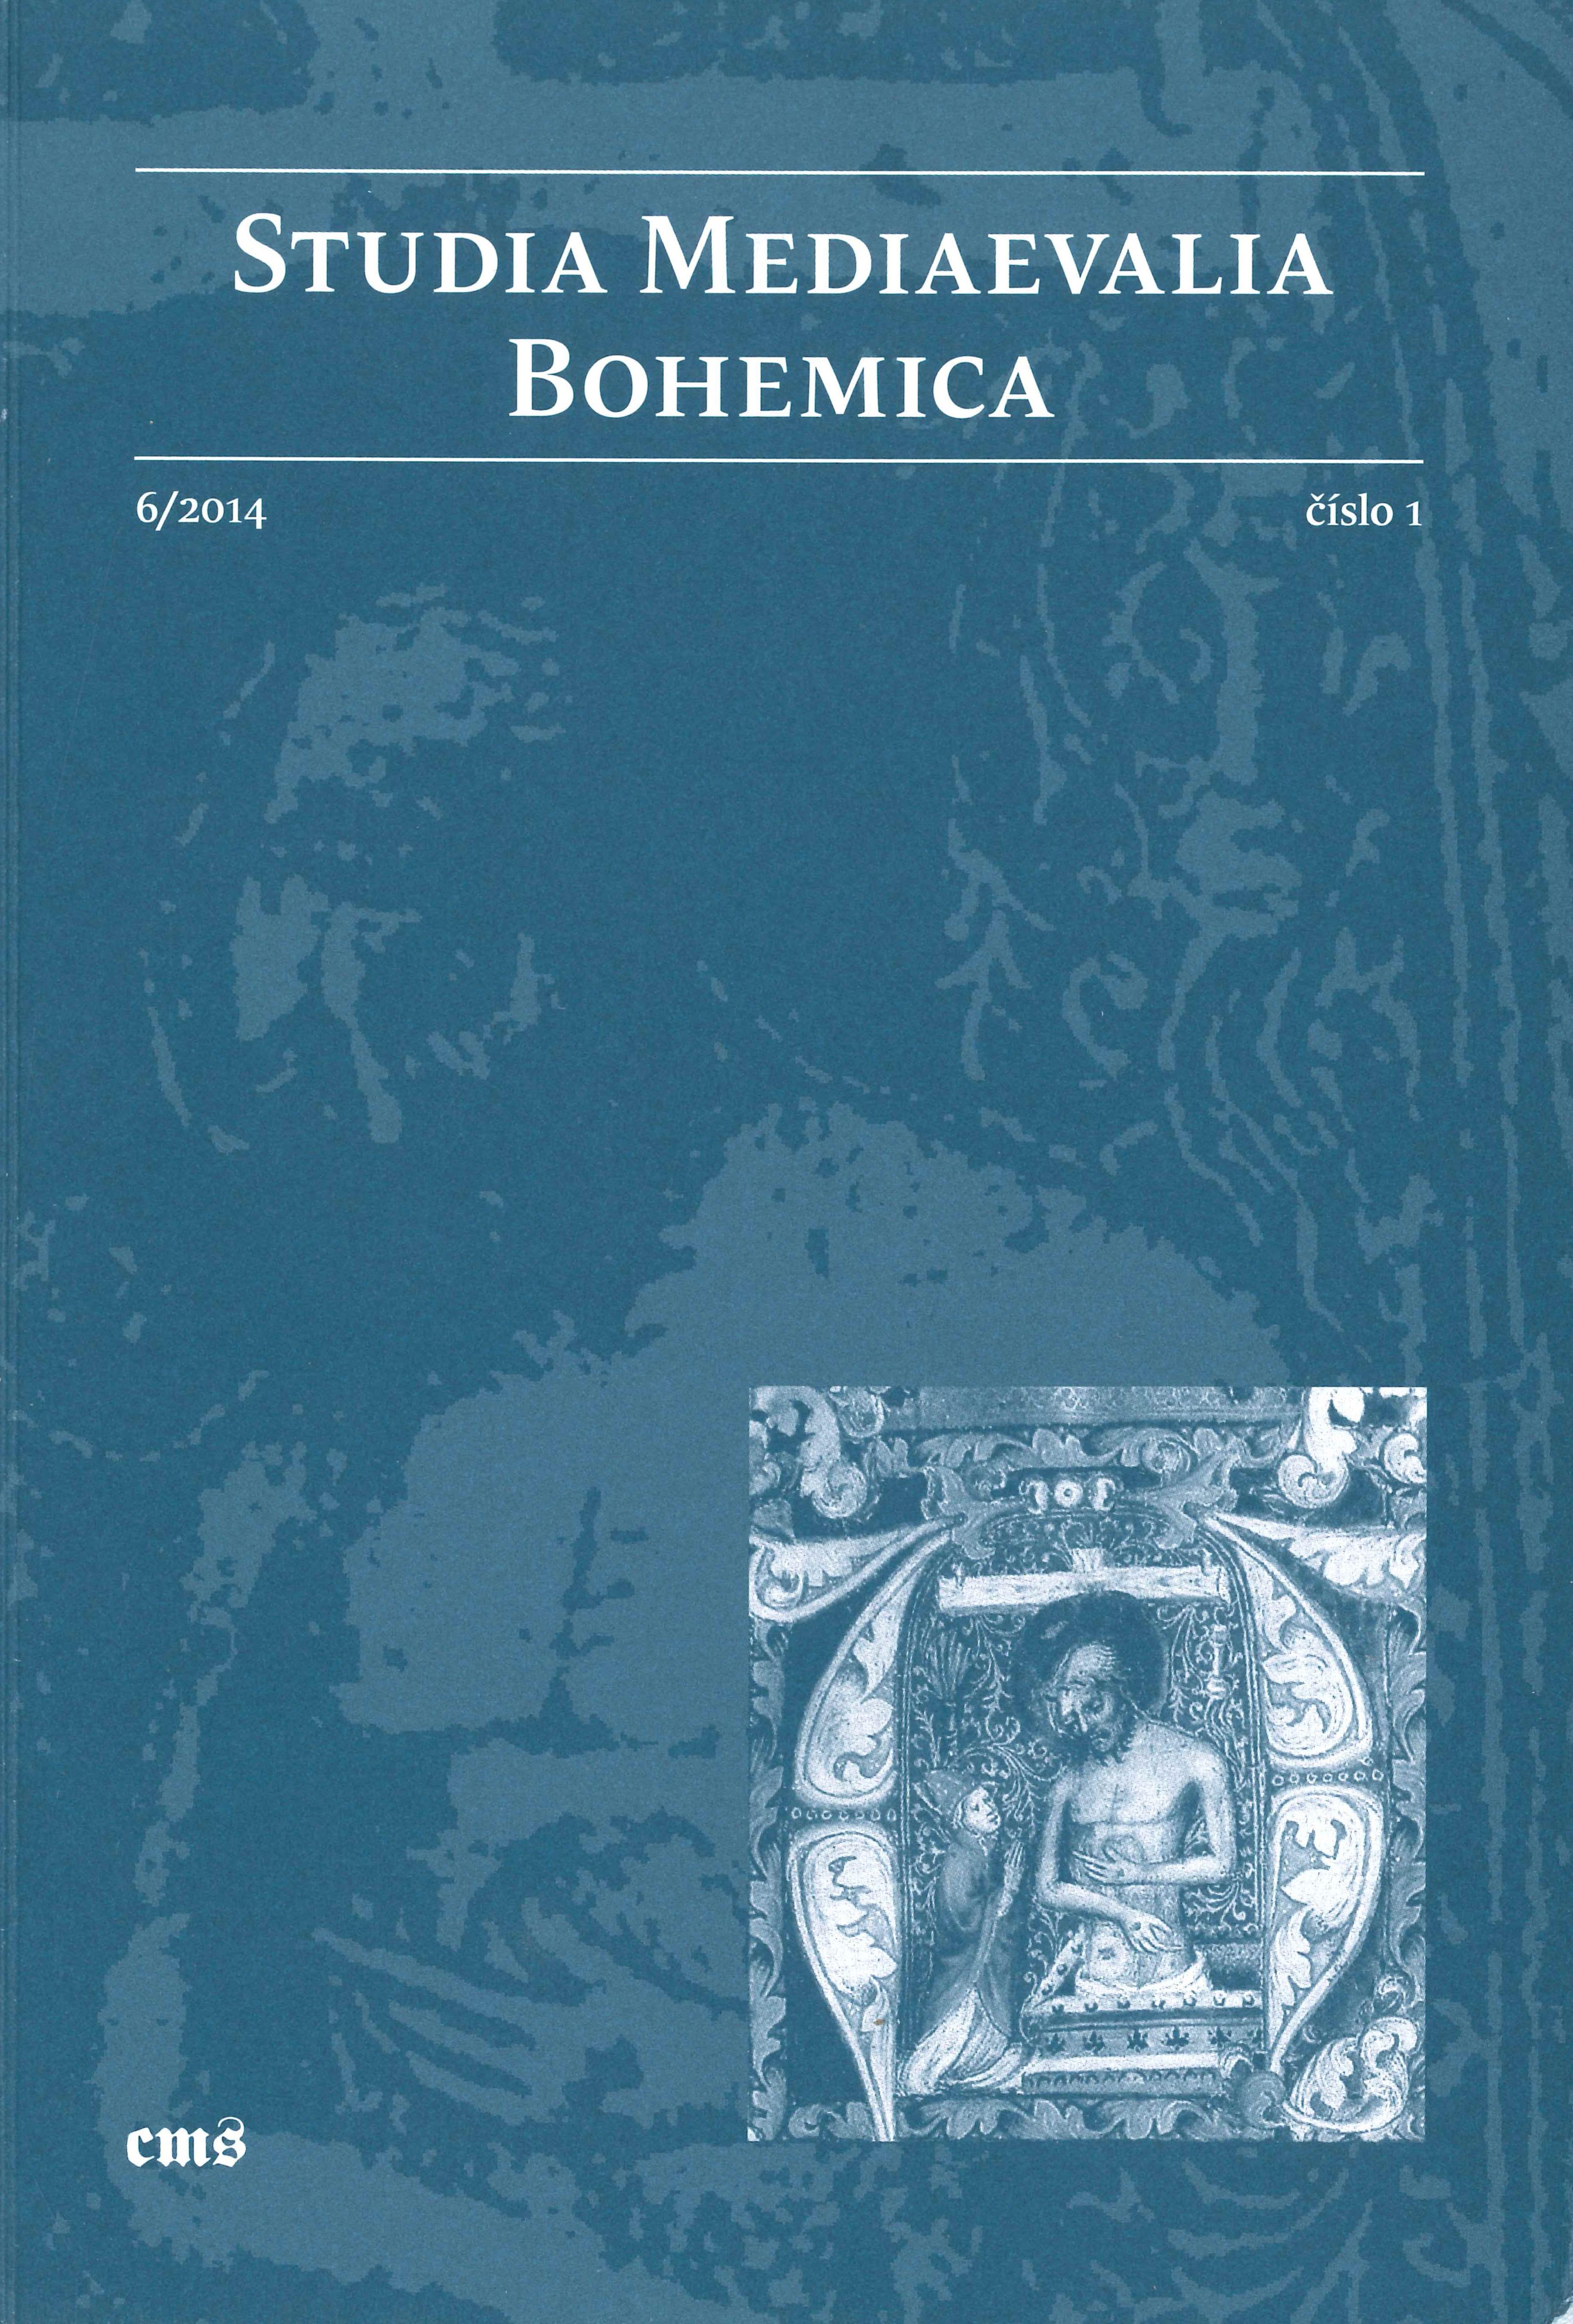 Unknown forgery of the deeds of Sigismund of Luxembourg and the counterfeiting activity of Oldřich II of Rožmberk Cover Image